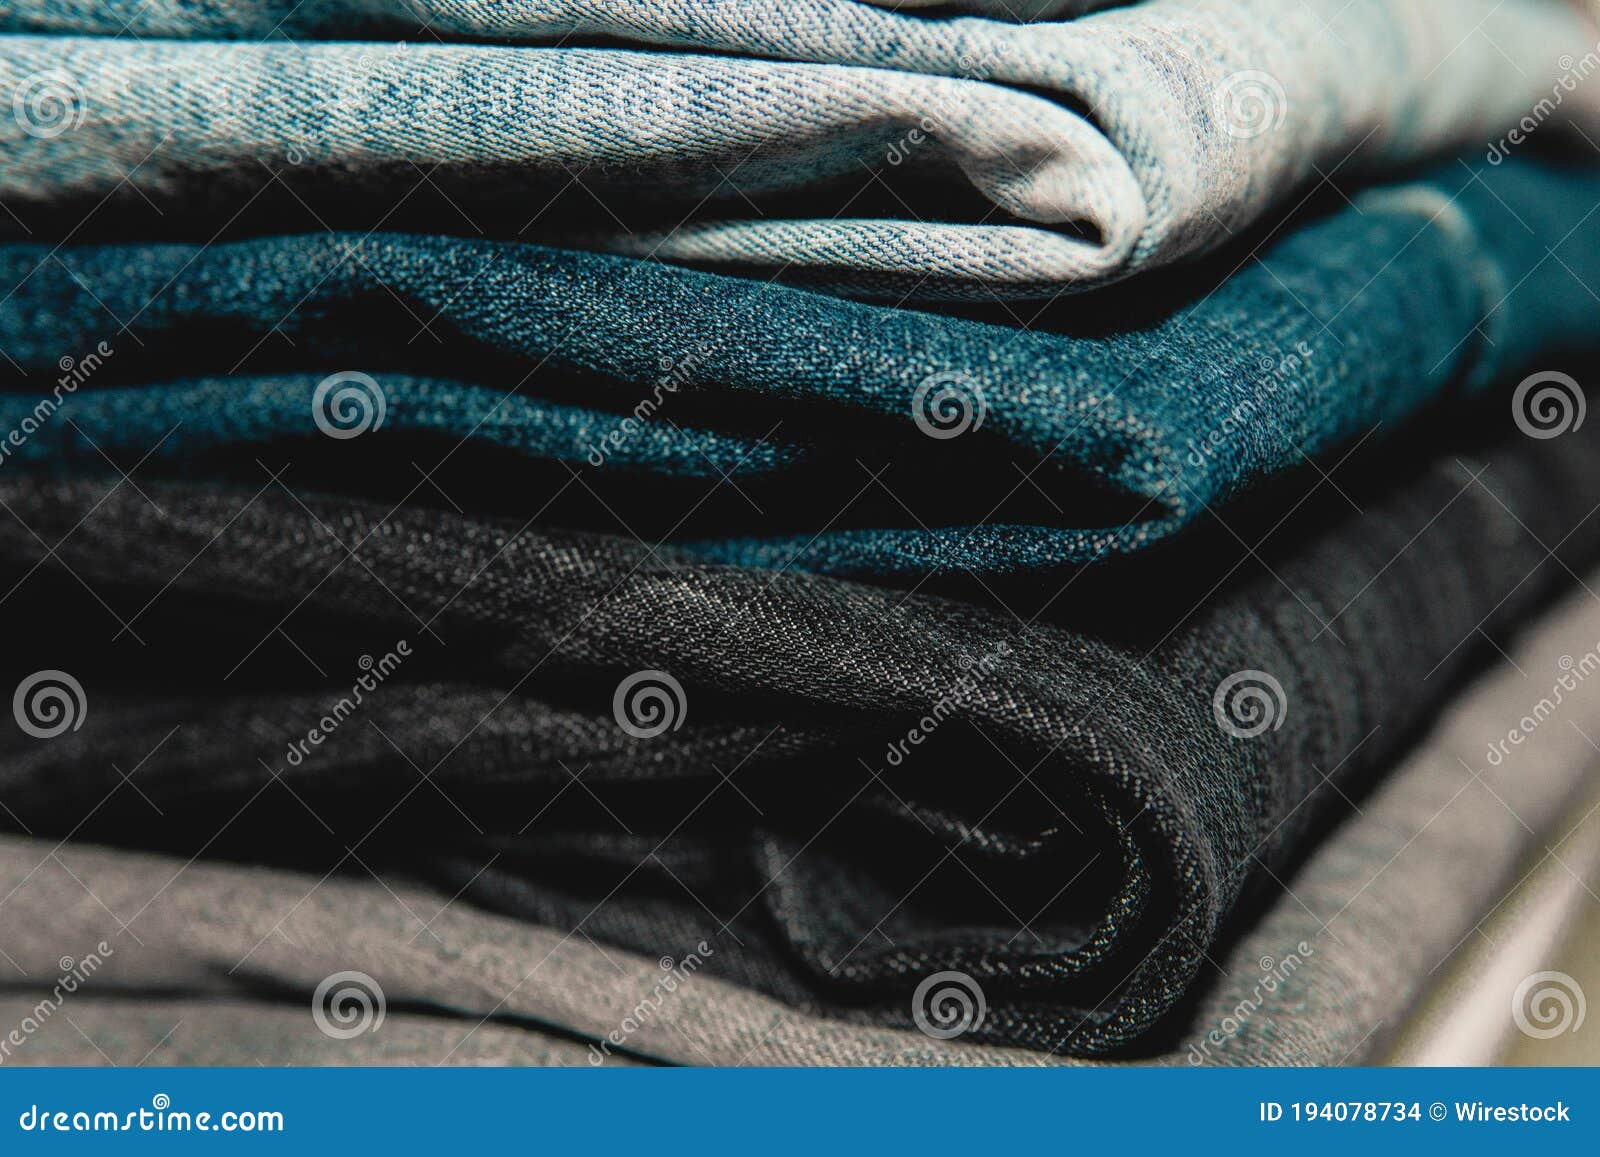 Stack of Neatly Folded Jeans Stock Photo - Image of close, fabric ...